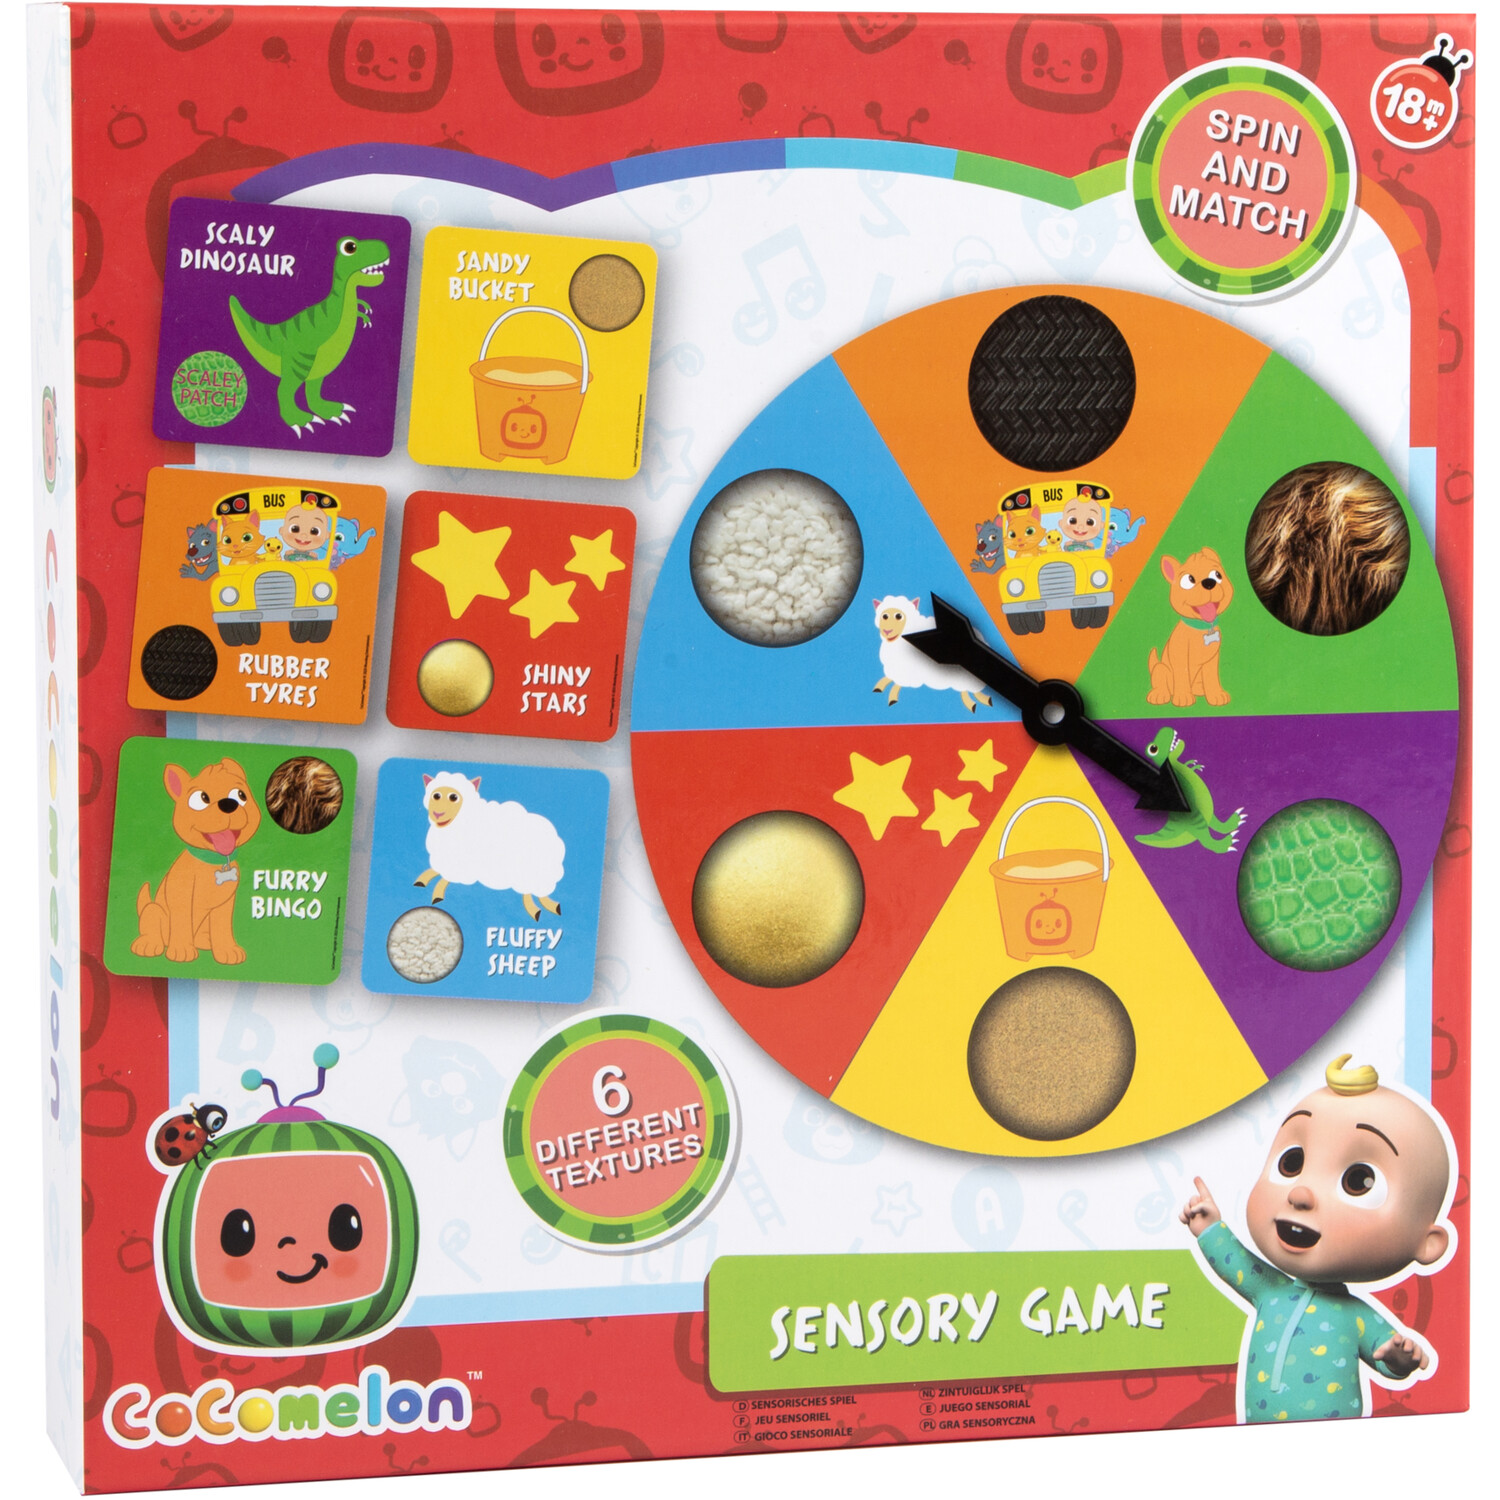 CoComelon Spin and Match Sensory Game Image 1